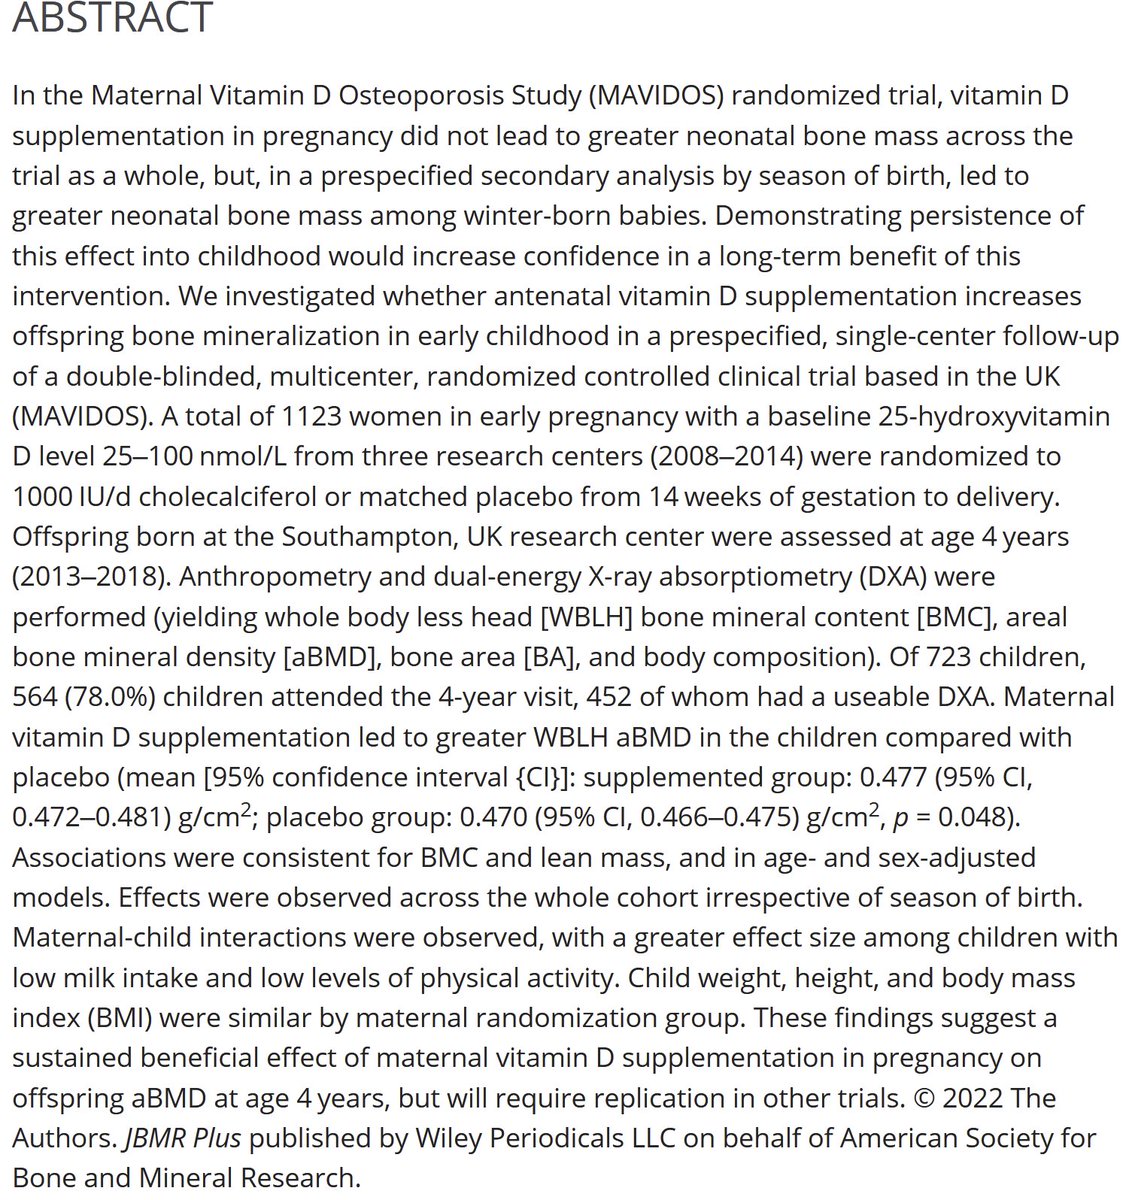 Maternal vitamin D supplementation in pregnancy has sustained beneficial effects on offspring bone density at age 4 years; important new data from our @MRC_LEU MAVIDOS study just published online @DrBethCurtis18 @SouthamptonBRC asbmr.onlinelibrary.wiley.com/doi/10.1002/jb…